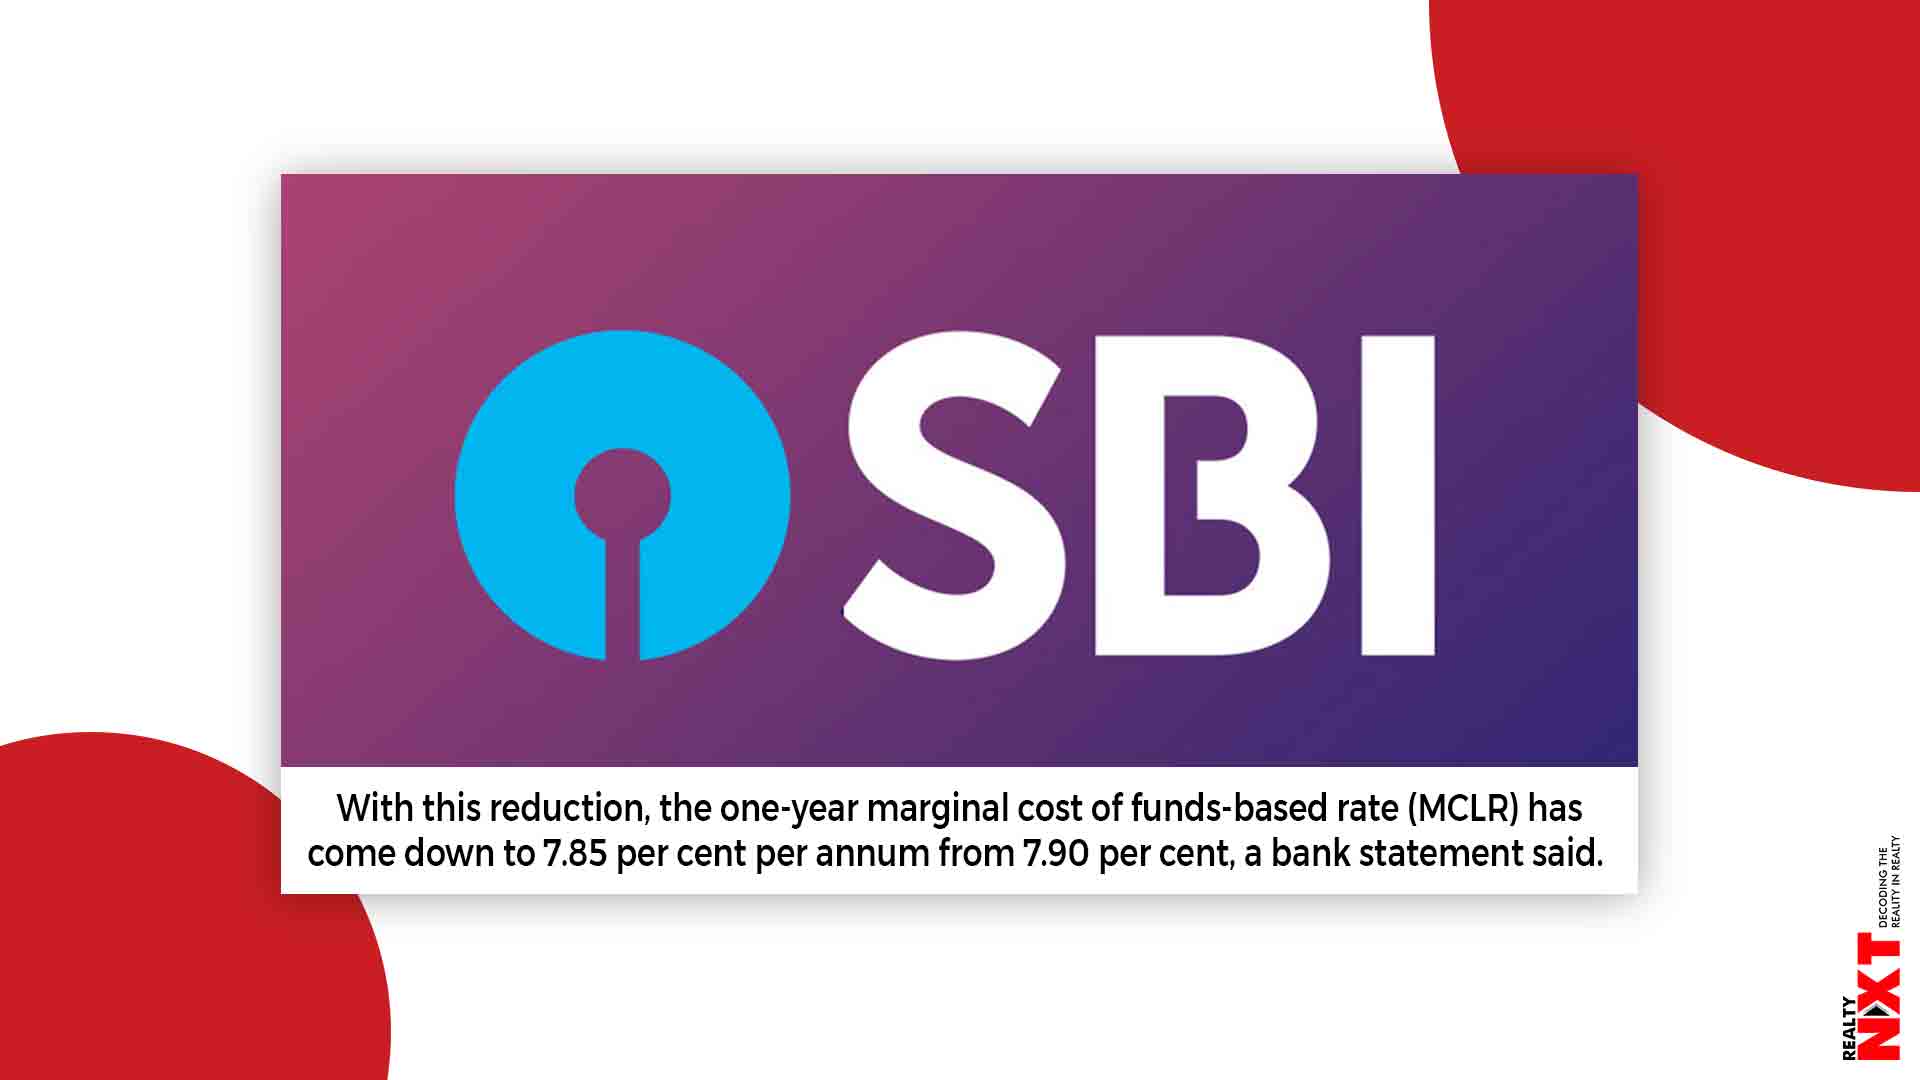 Sbi Announced 5 Basis Points Bps Reduction In Its Mclr Across Tenors Realtynxt 2436